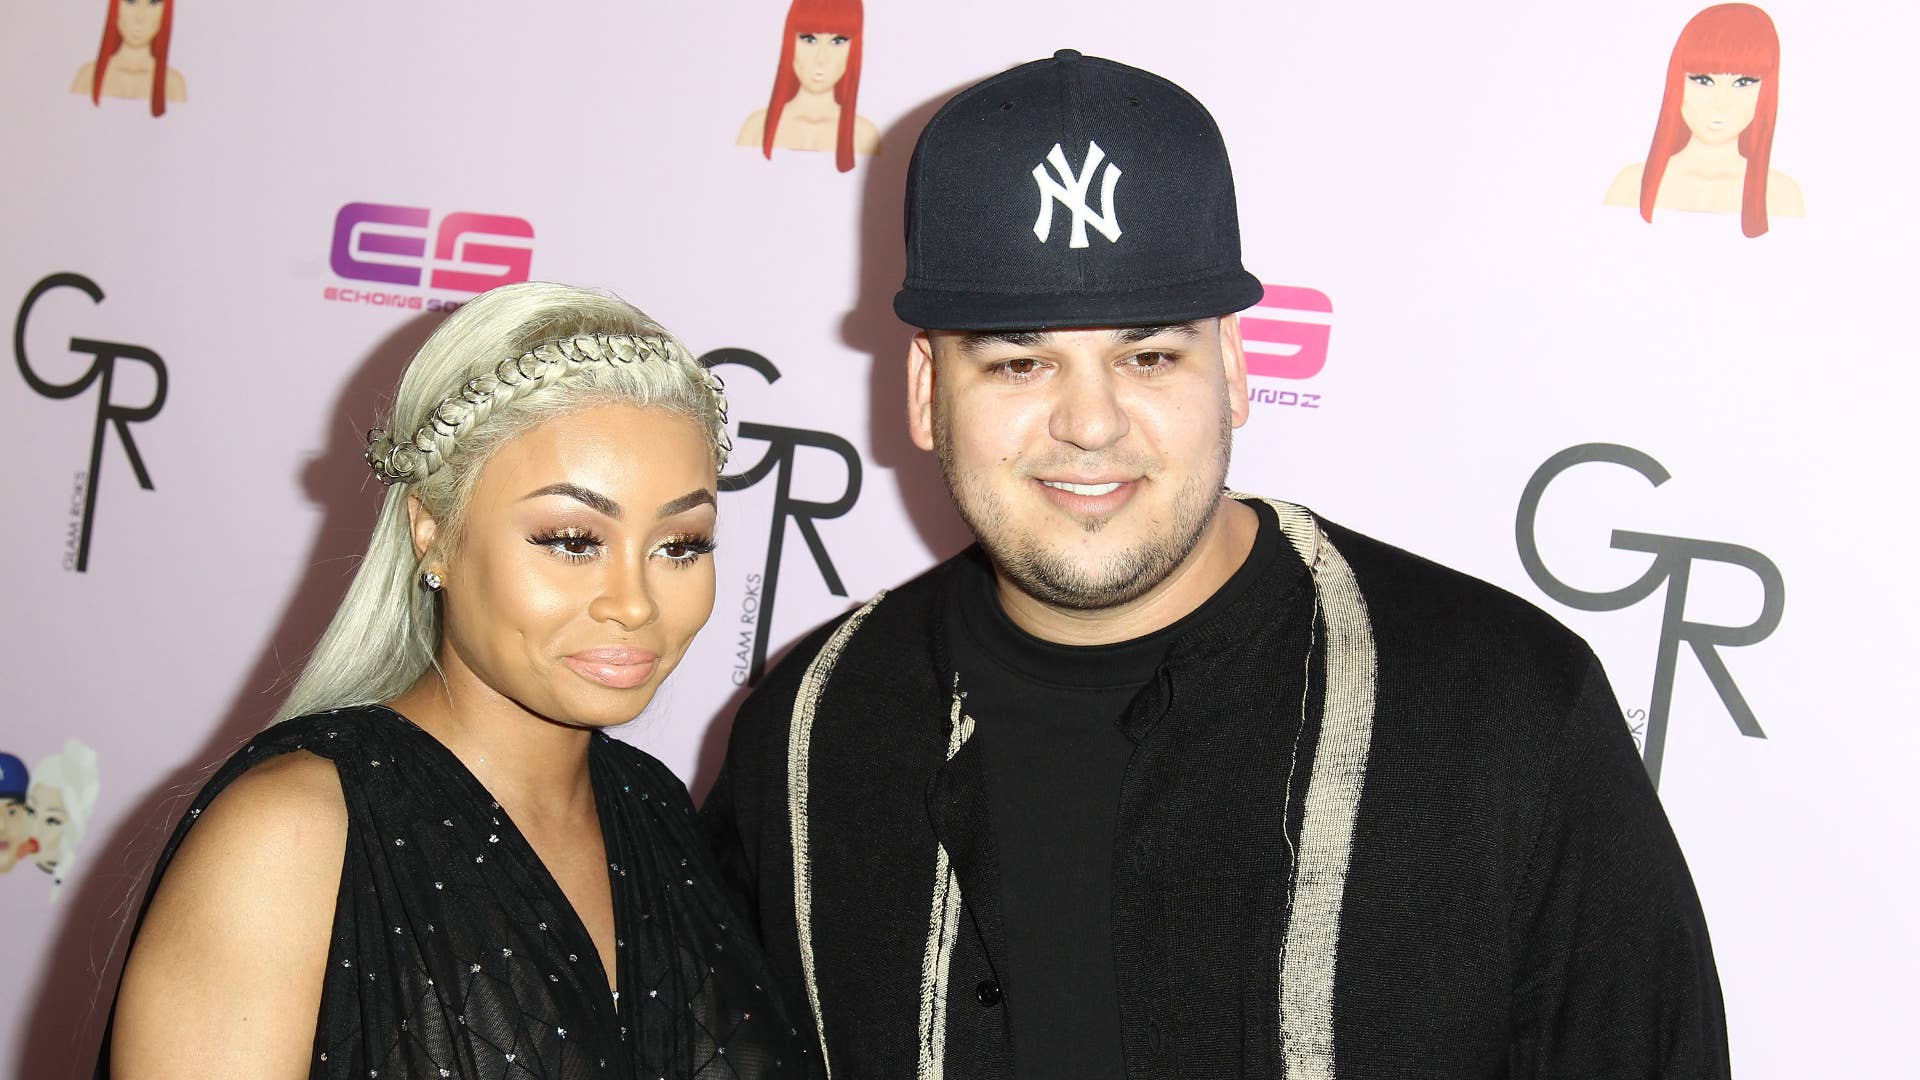 Blac Chyna and Rob Kardashian attend red carpet together.